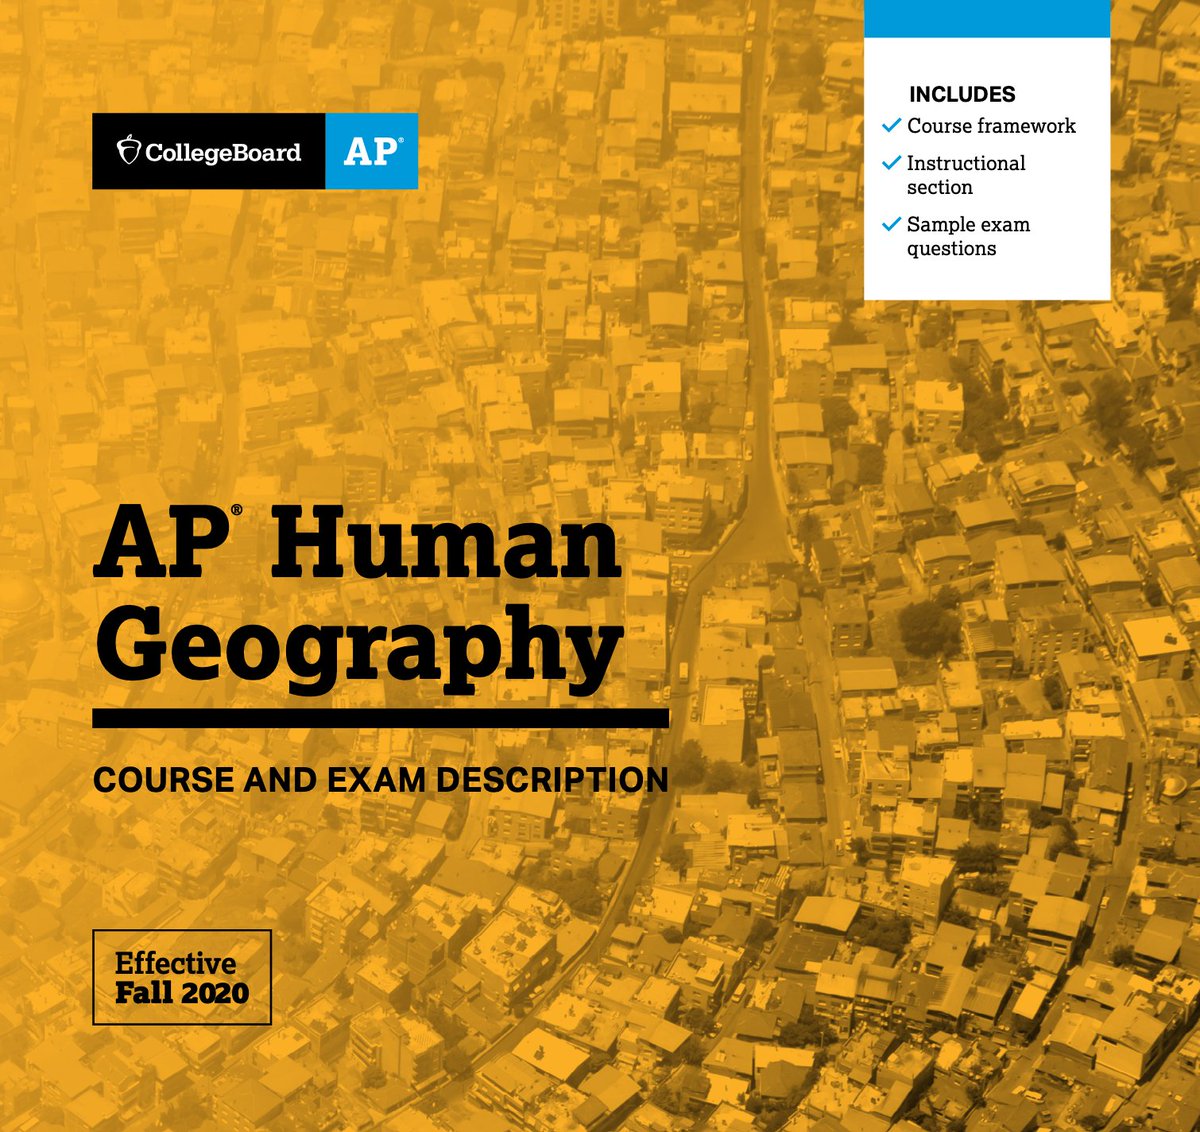 Course is AP with College Board created+controlled curriculum, so I suspected it wasn't teacher's lesson plan. She's teaching a packet that I found here with "gentrification pros and cons" class activity. Any lesson can fall on AP Exam, so they teach them. https://apcentral.collegeboard.org/pdf/ap-human-geography-course-and-exam-description.pdf?course=ap-human-geography